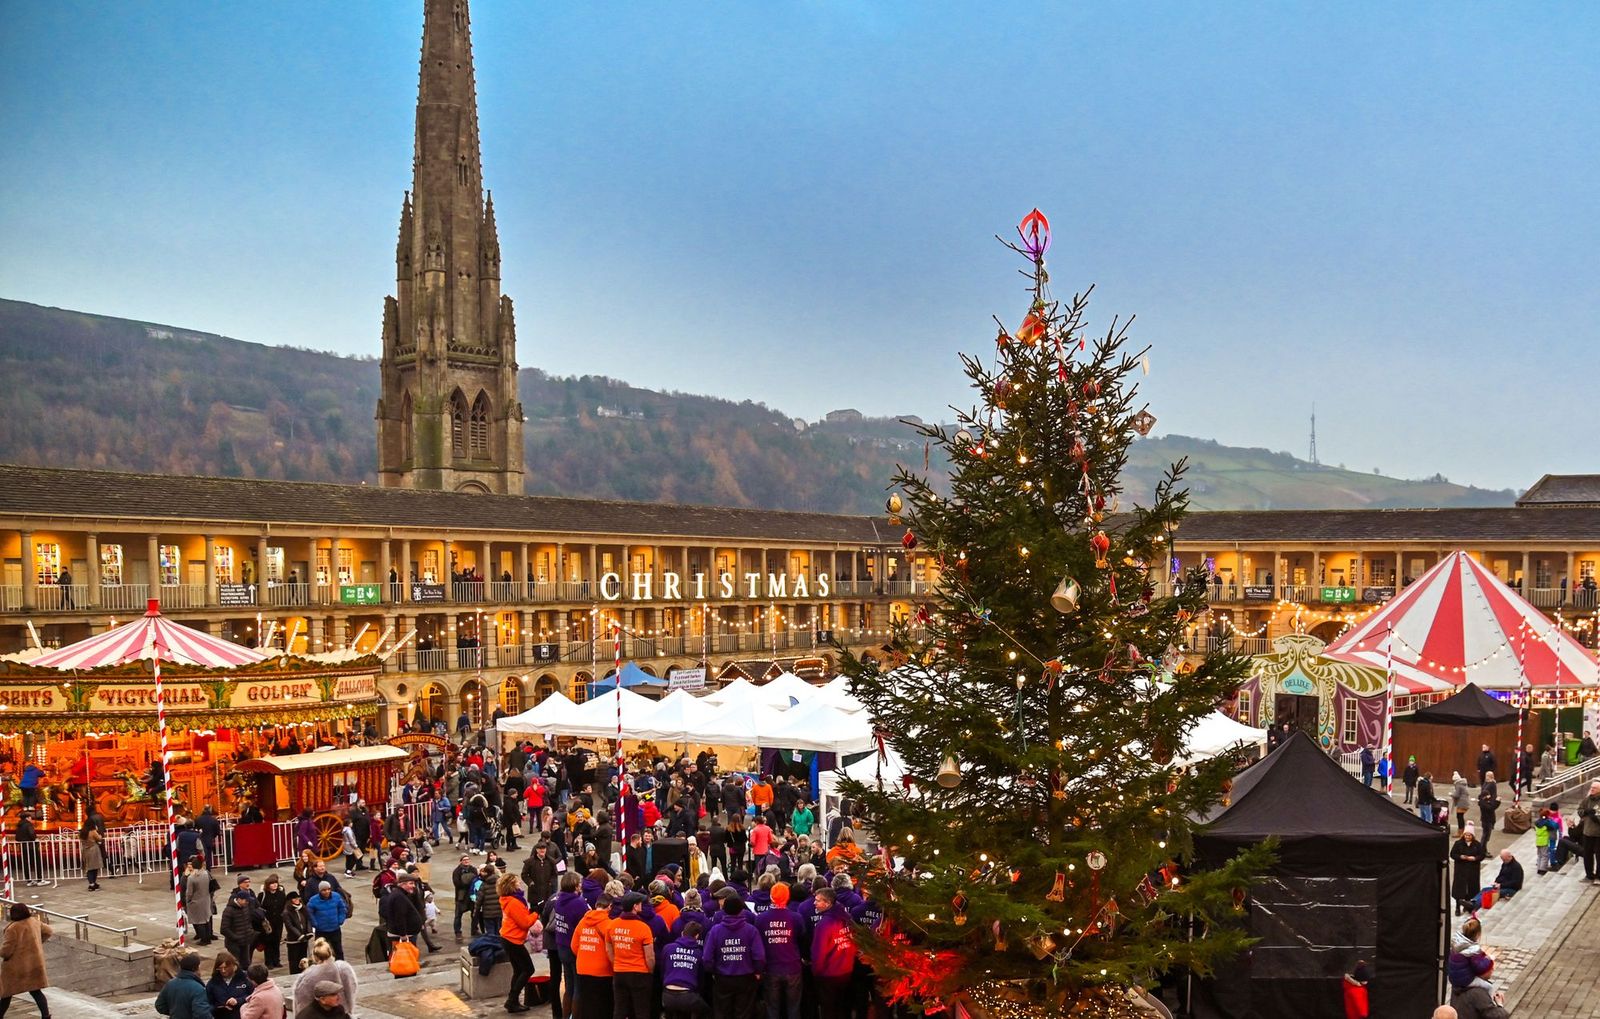 Christmas is back, bigger and better at The Piece Hall